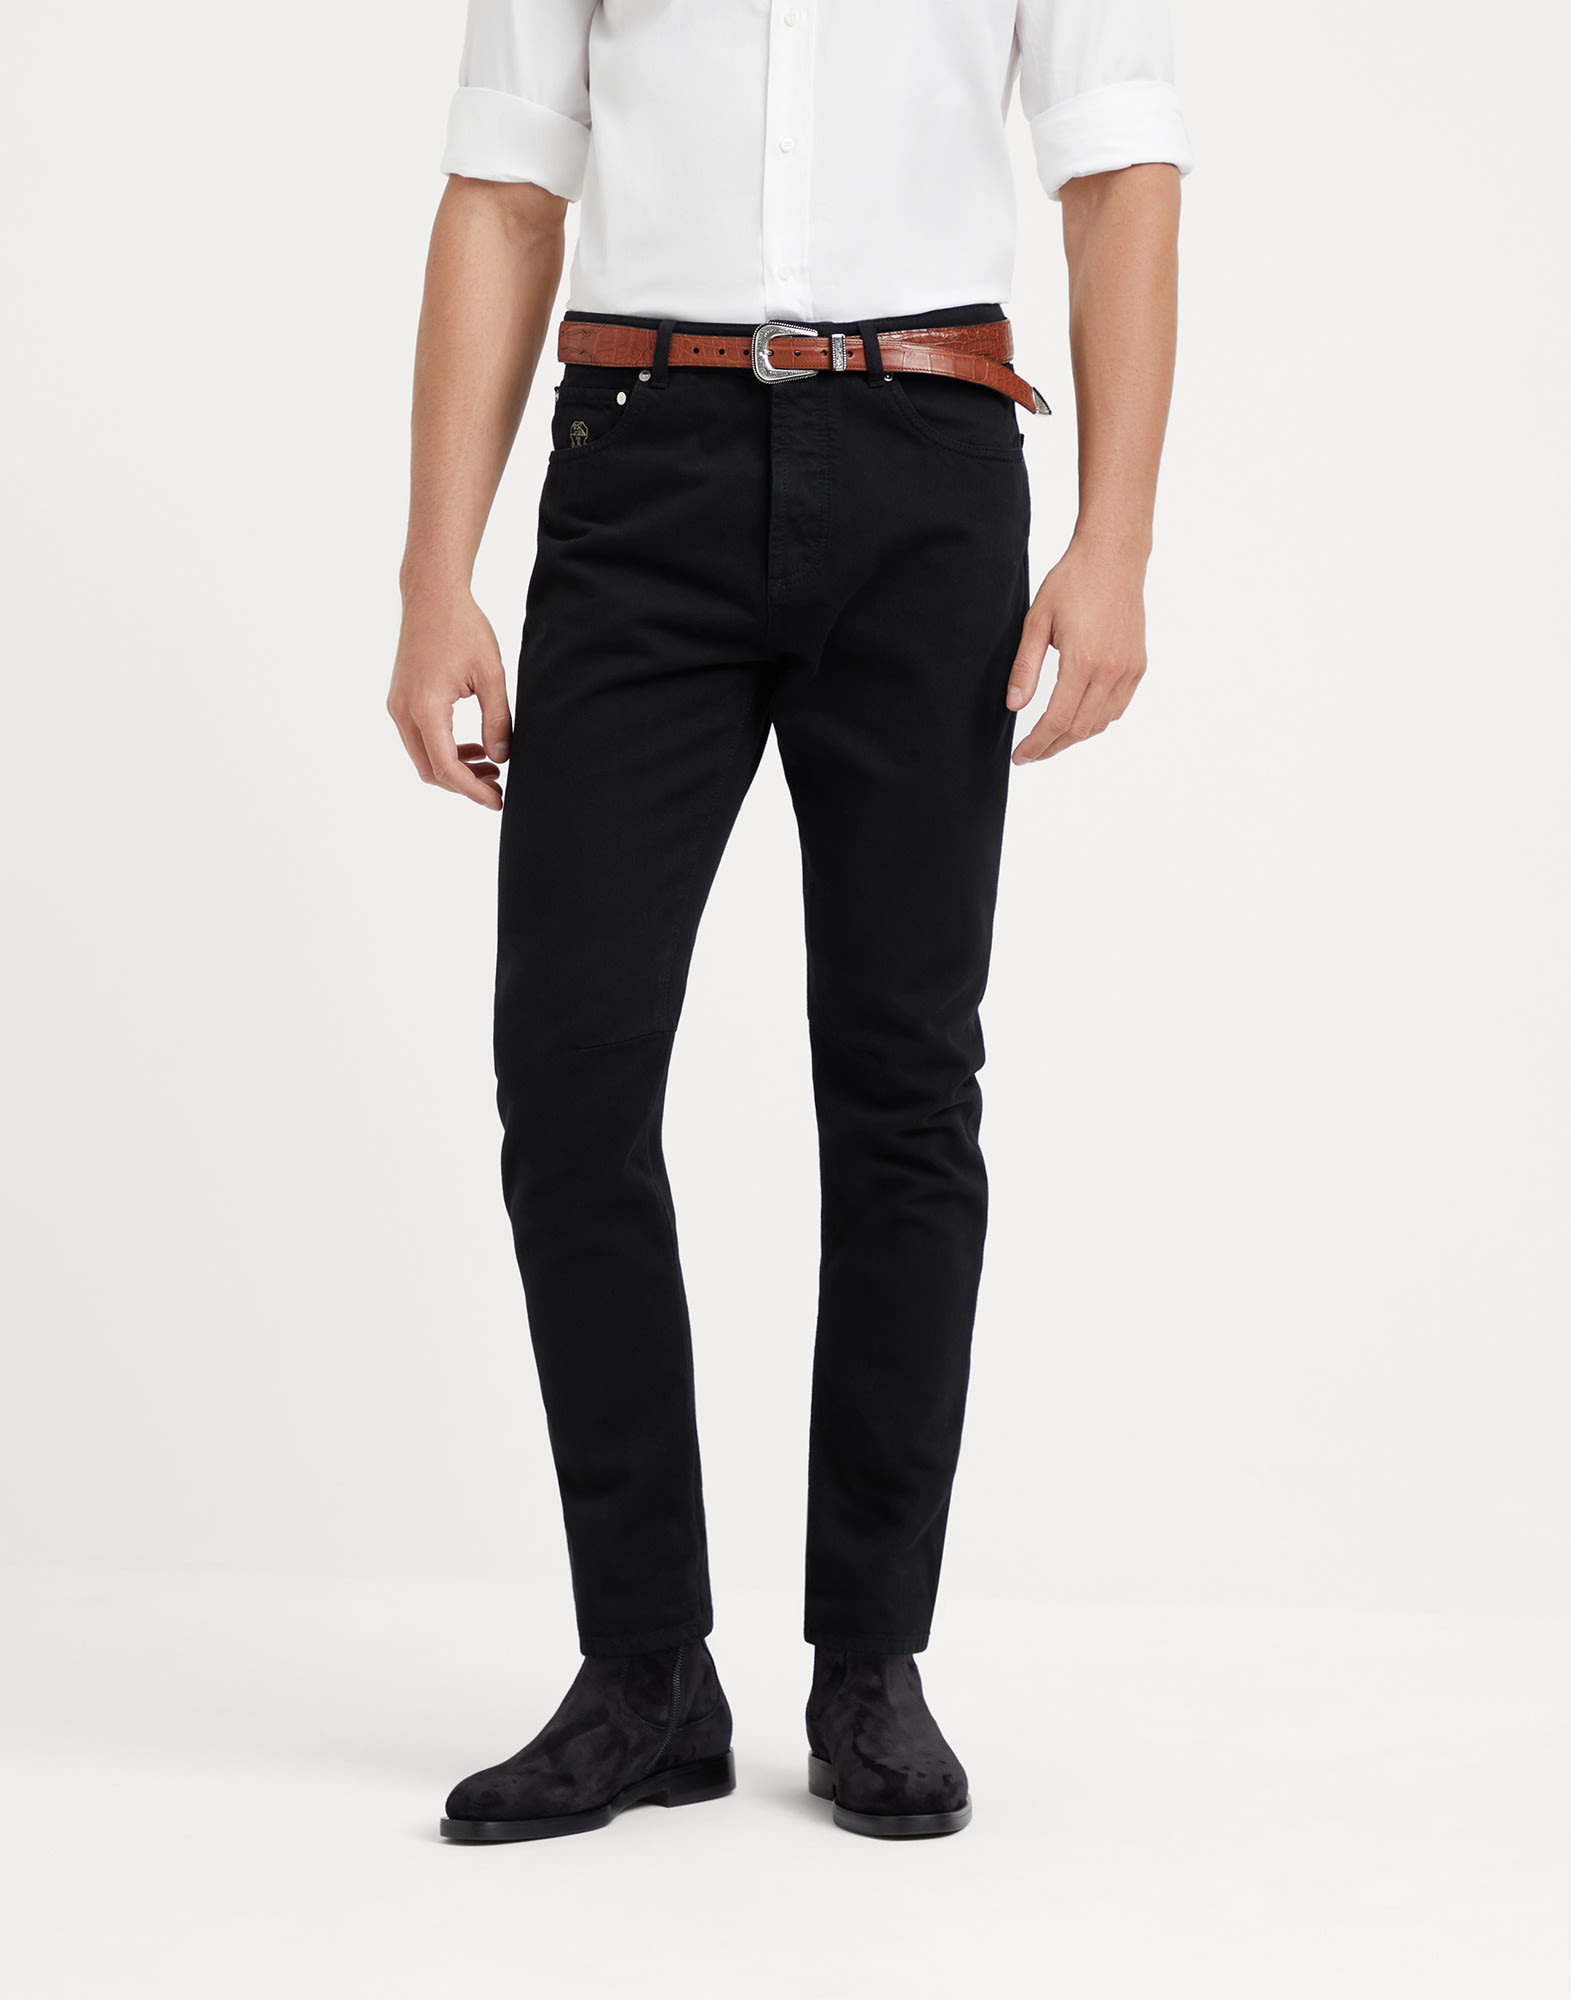 Leisure fit five-pocket trousers